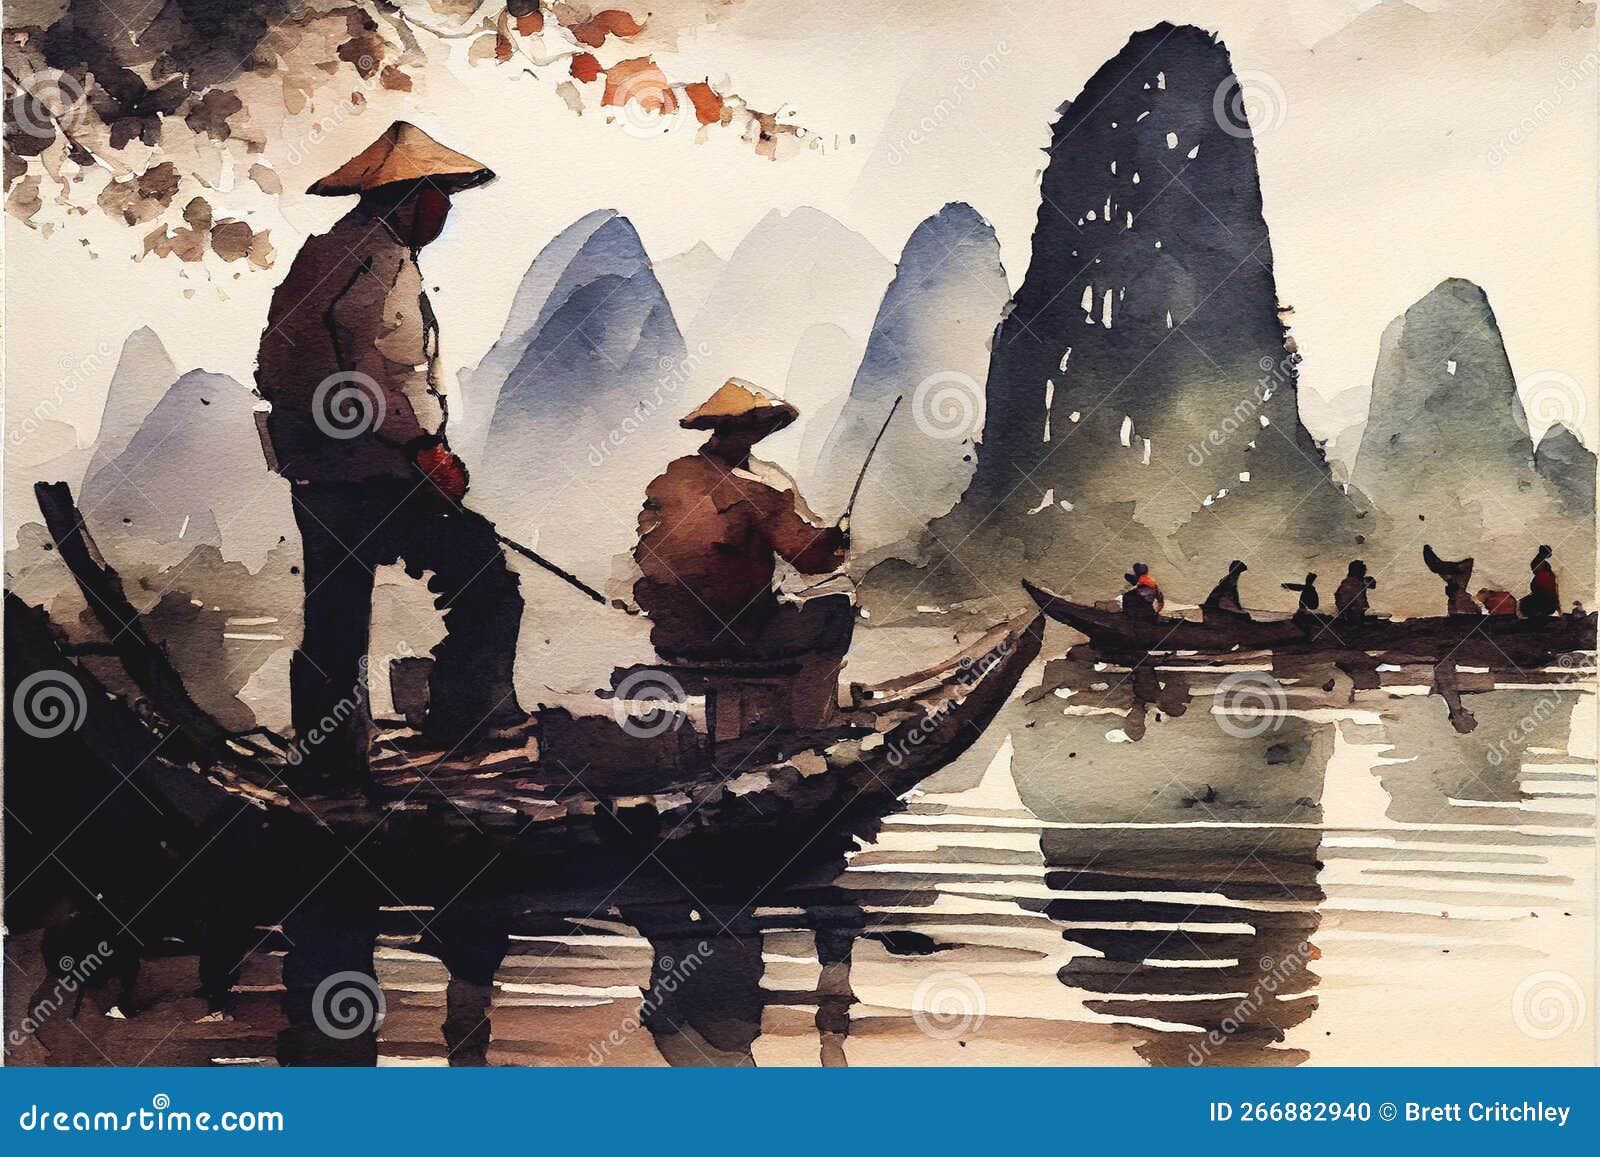 Fisherman Fishing in Asia on Boat Watercolor Painting Illustration Stock  Illustration - Illustration of china, thailand: 266882940